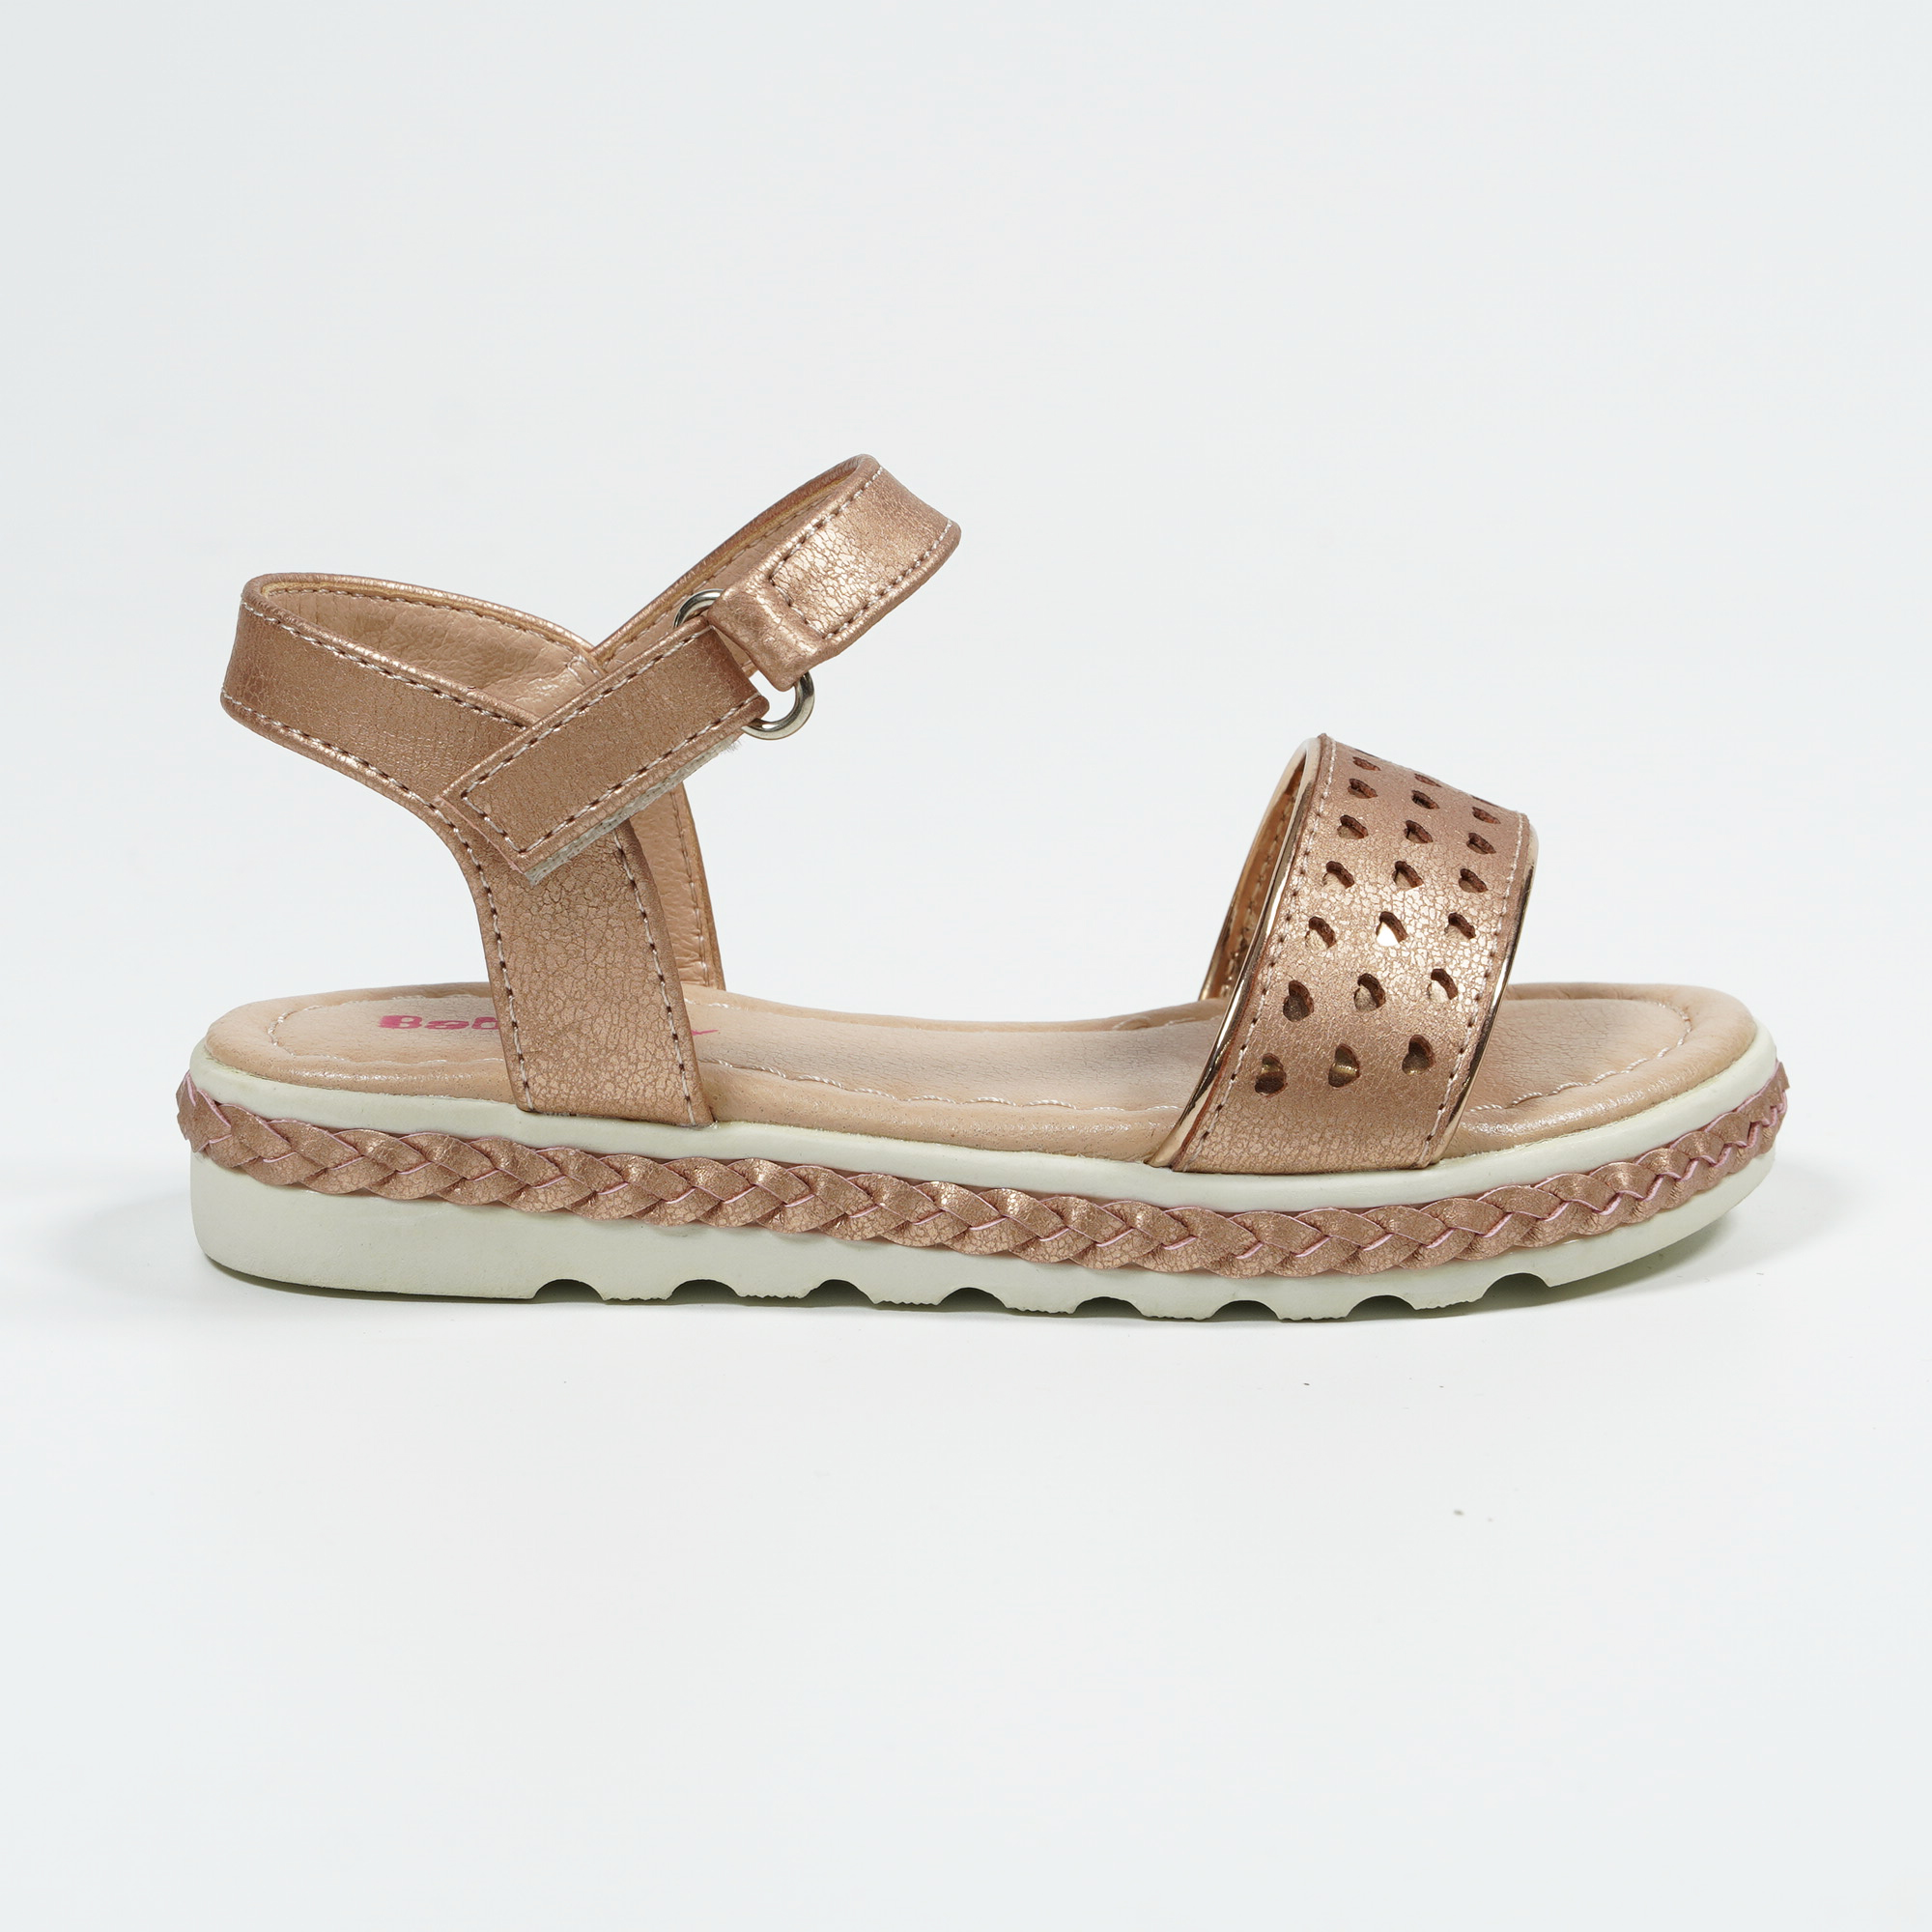 rubber sandals women, rubber sandals women Suppliers and Manufacturers at